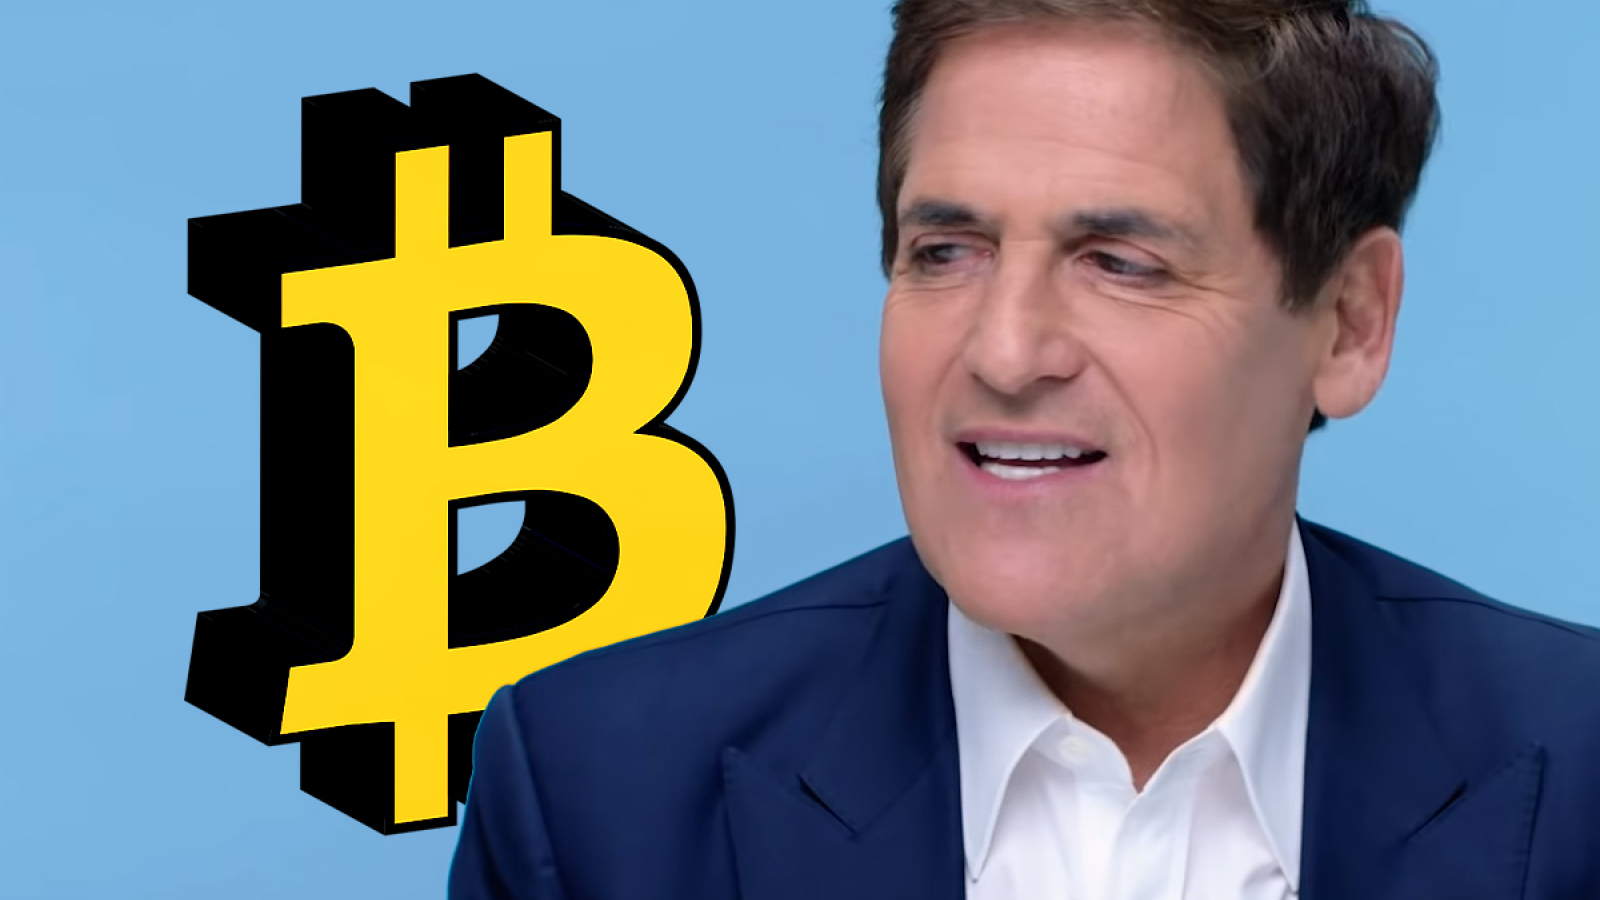 Mark Cuban Believes Blockchain is a Great Platform for Future Technology - The Bitcoin News